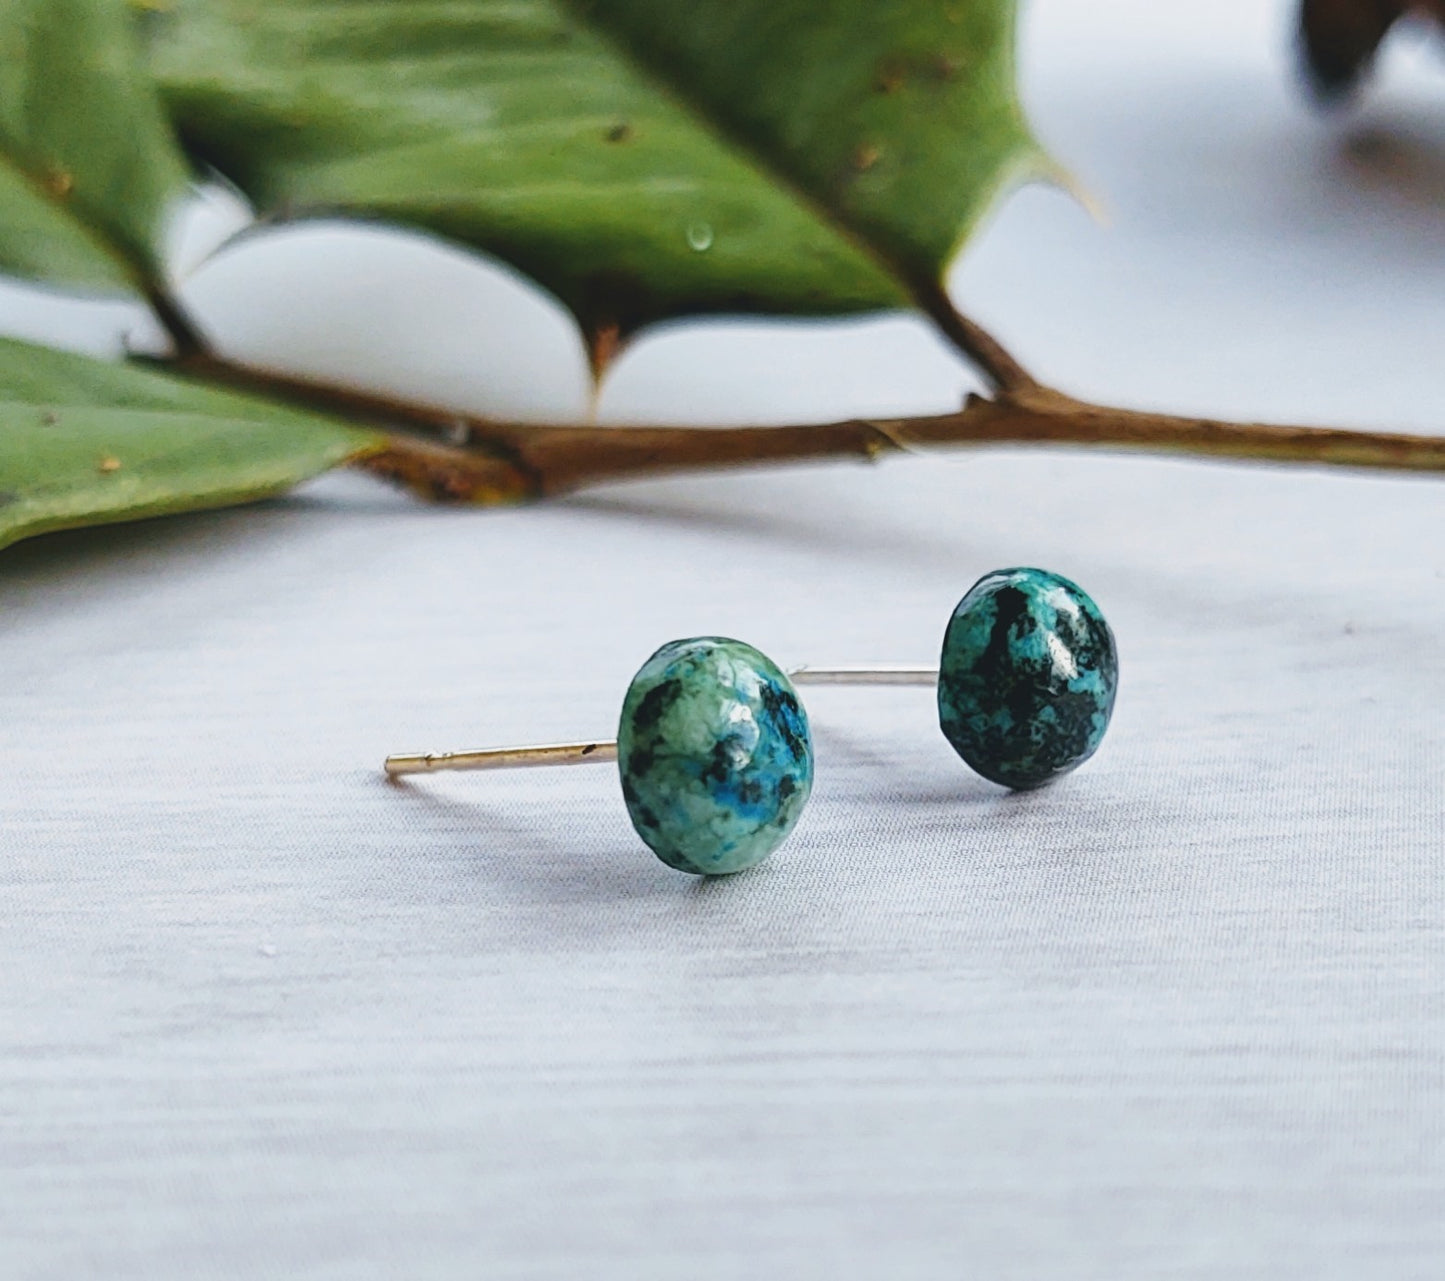 For Small Delights: African Turquoise gemstone earrings